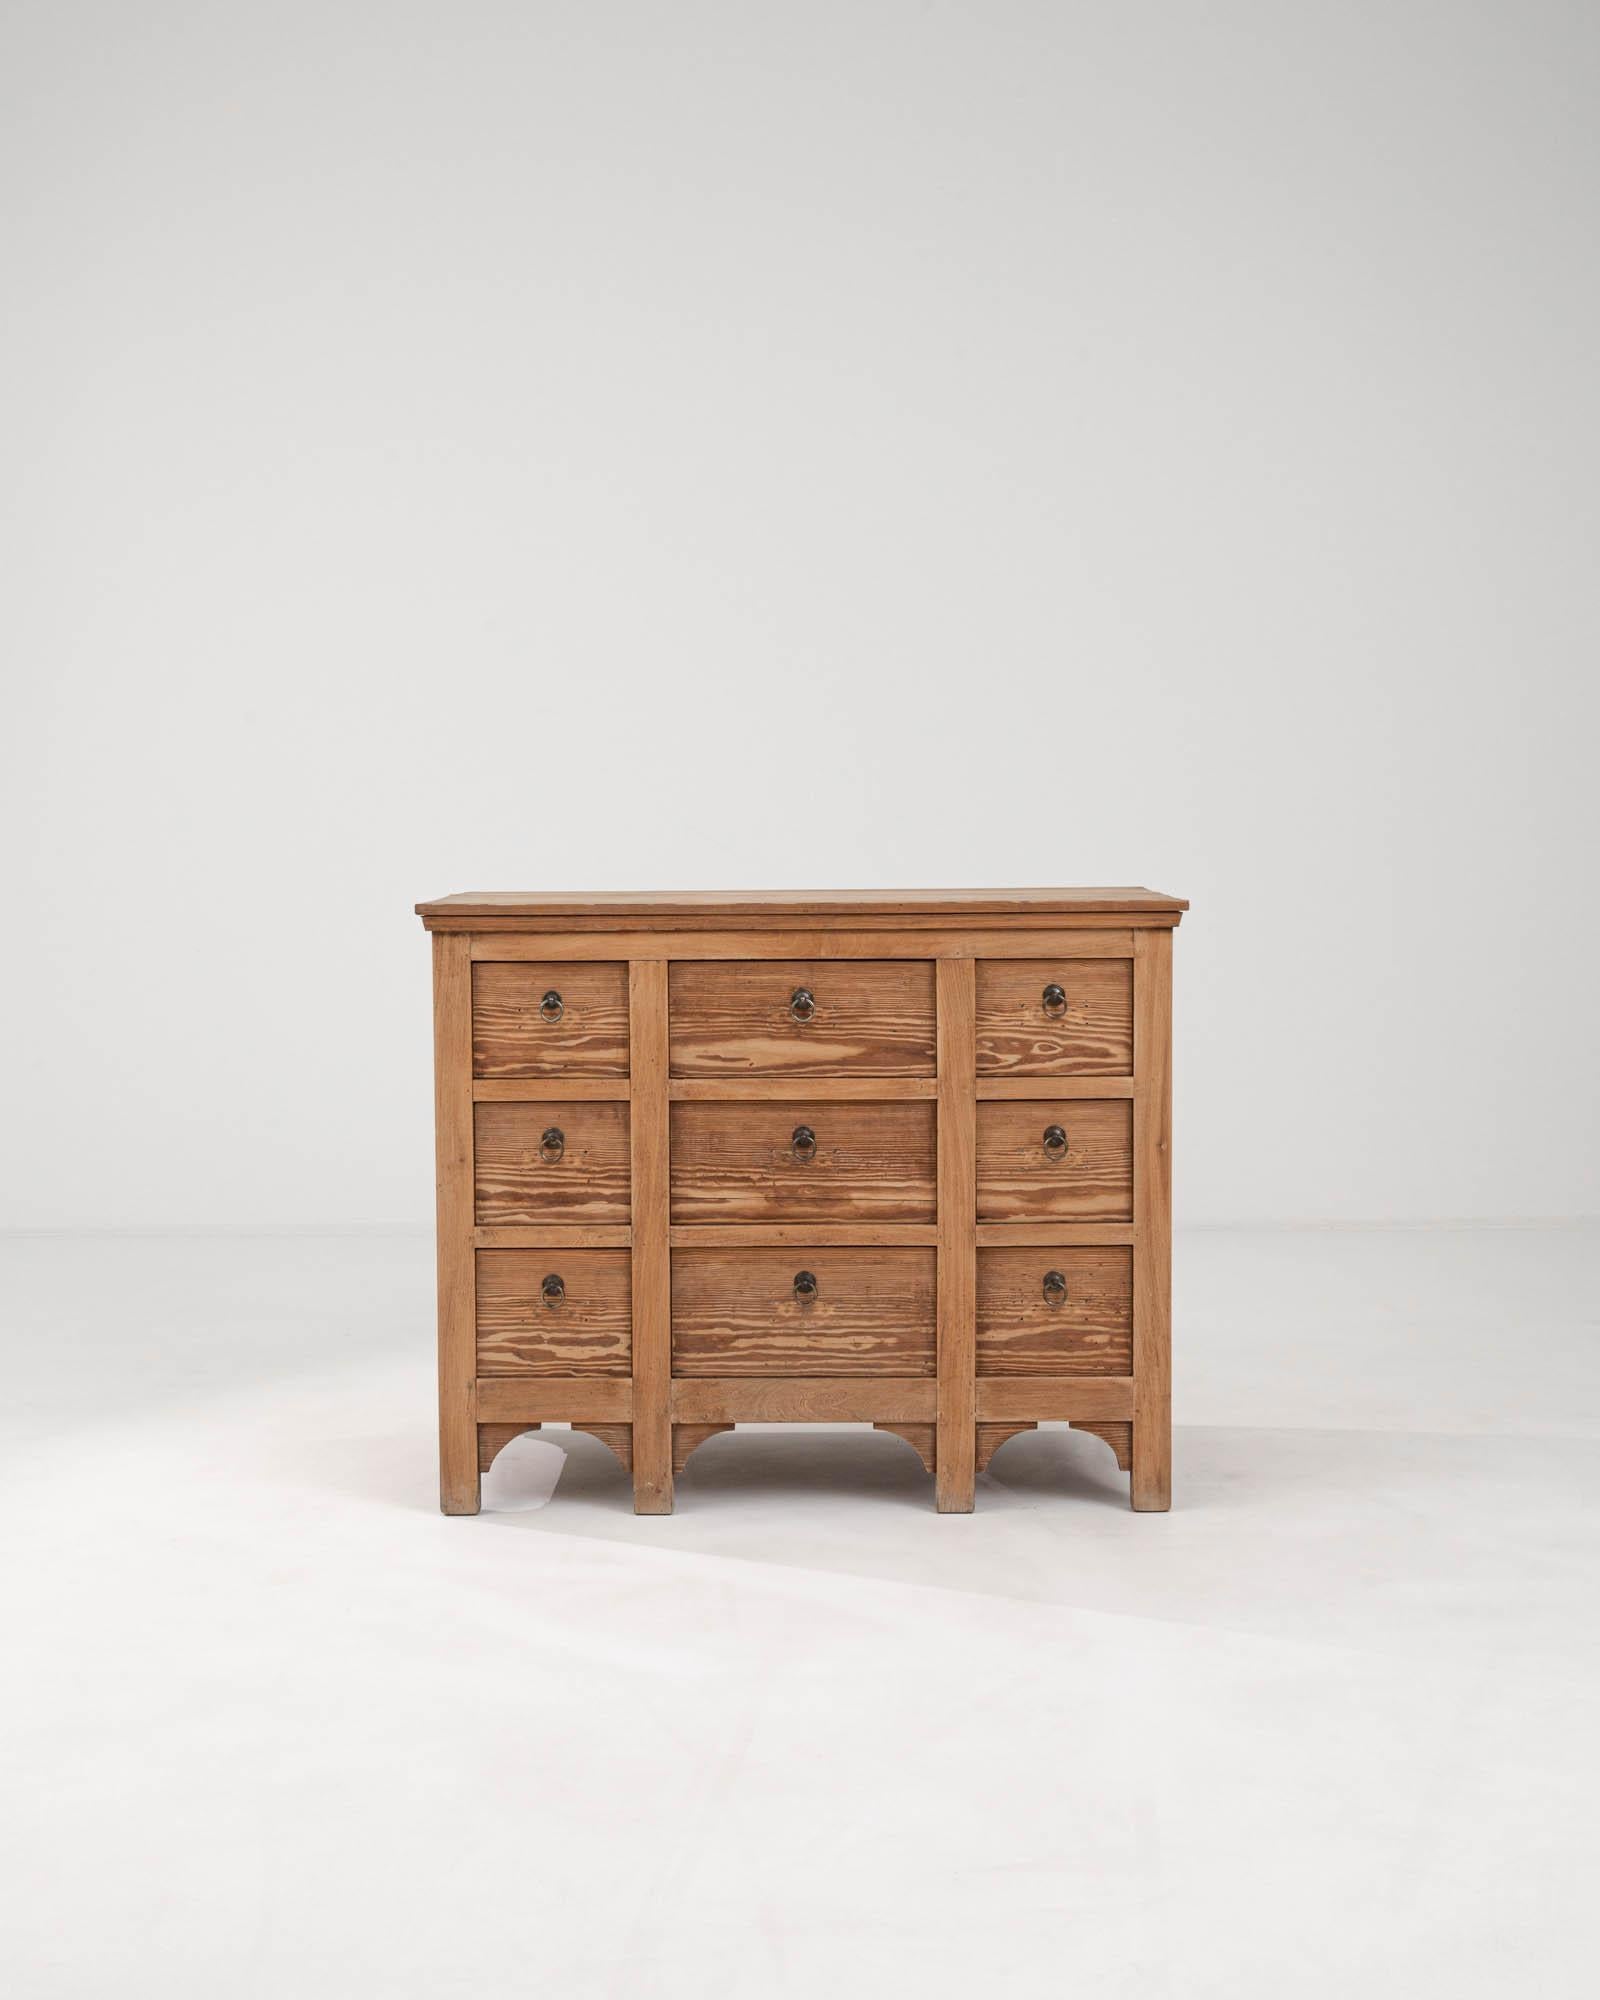 This 1900s French Wooden Chest of Drawers exudes classic elegance and utilitarian charm. Constructed from solid wood, its natural grain is a testament to the timeless beauty and durability of traditional materials. Each of the nine smoothly